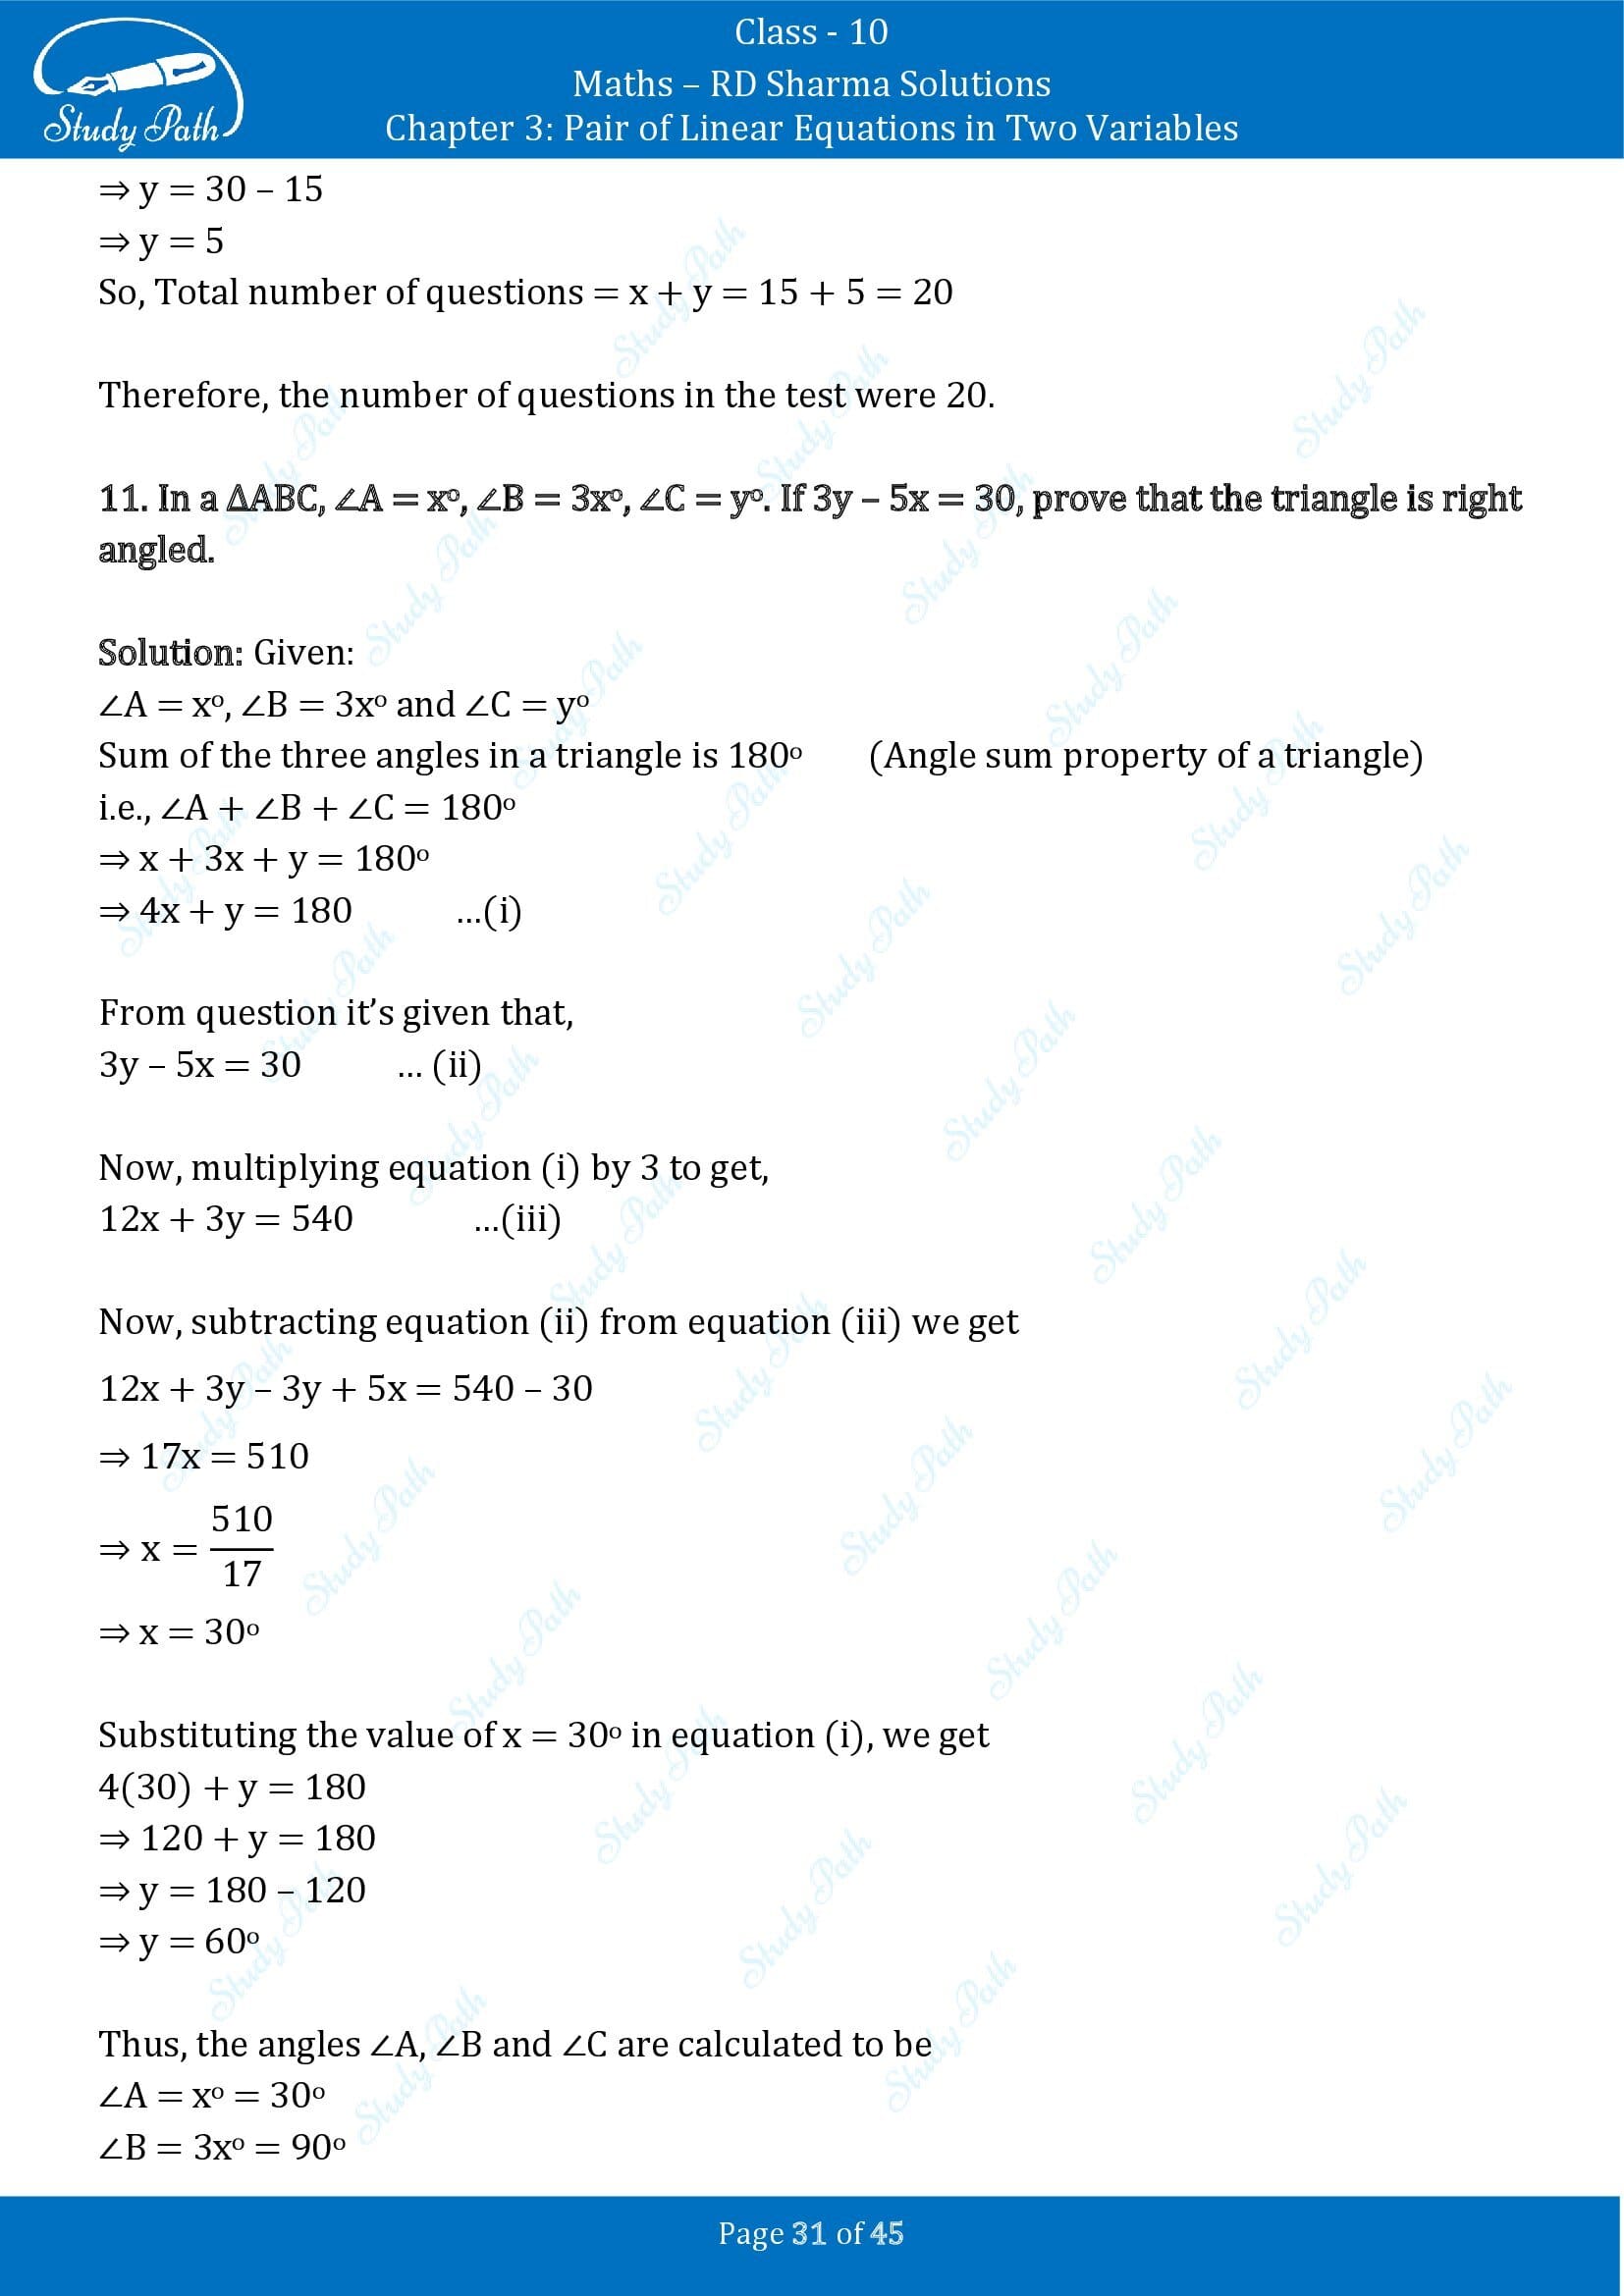 RD Sharma Solutions Class 10 Chapter 3 Pair of Linear Equations in Two Variables Exercise 3.11 00031